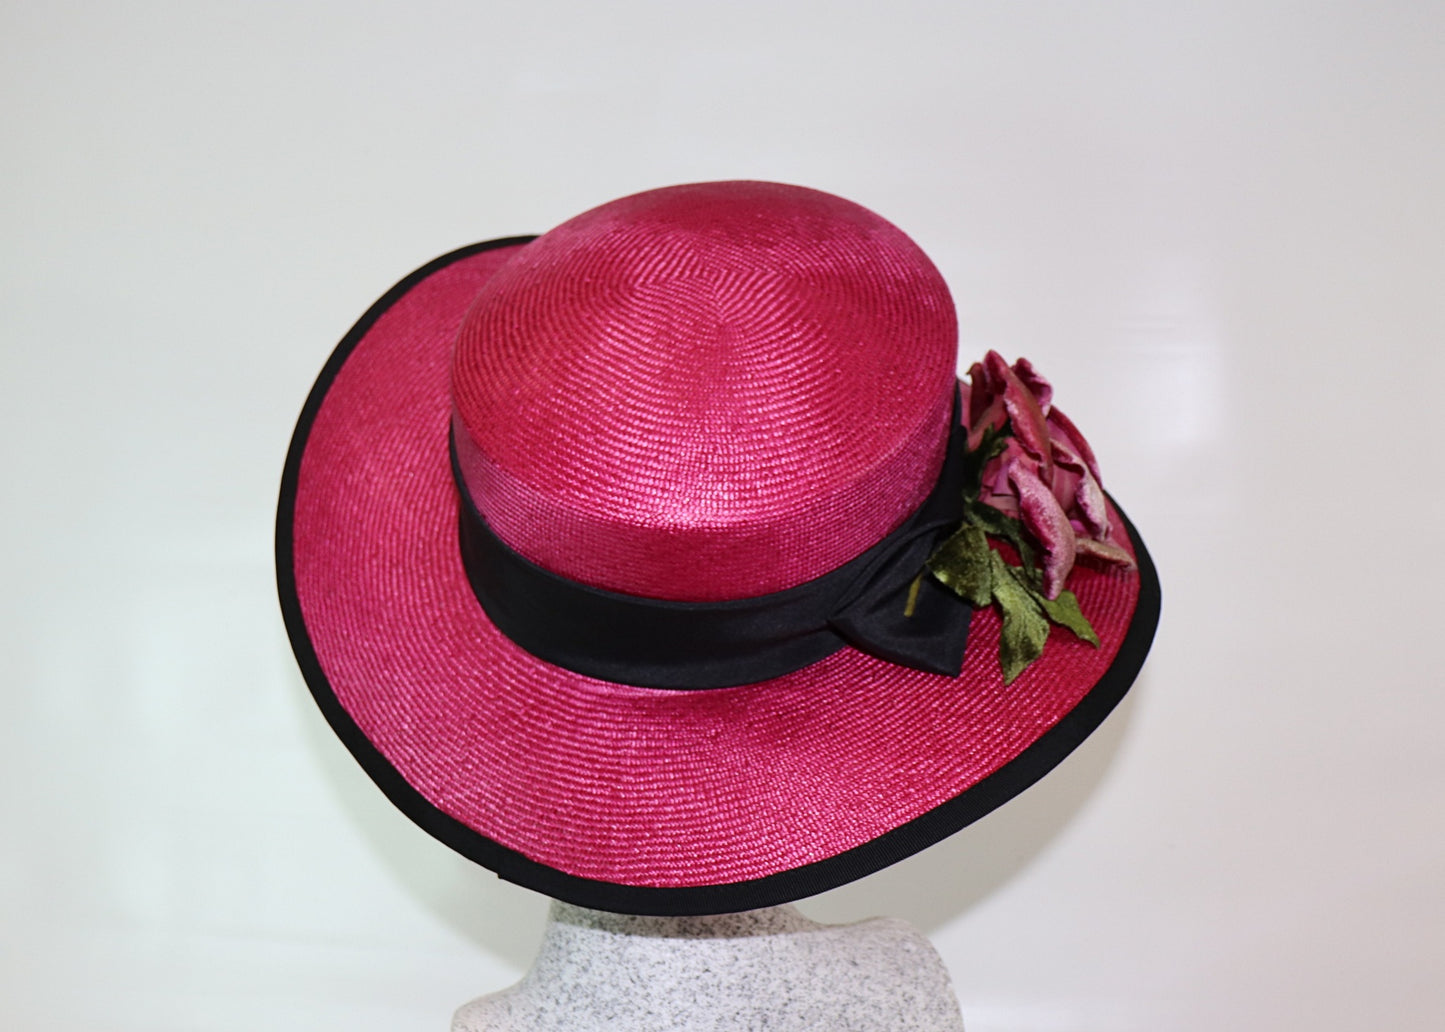 Straw hat pink with rose